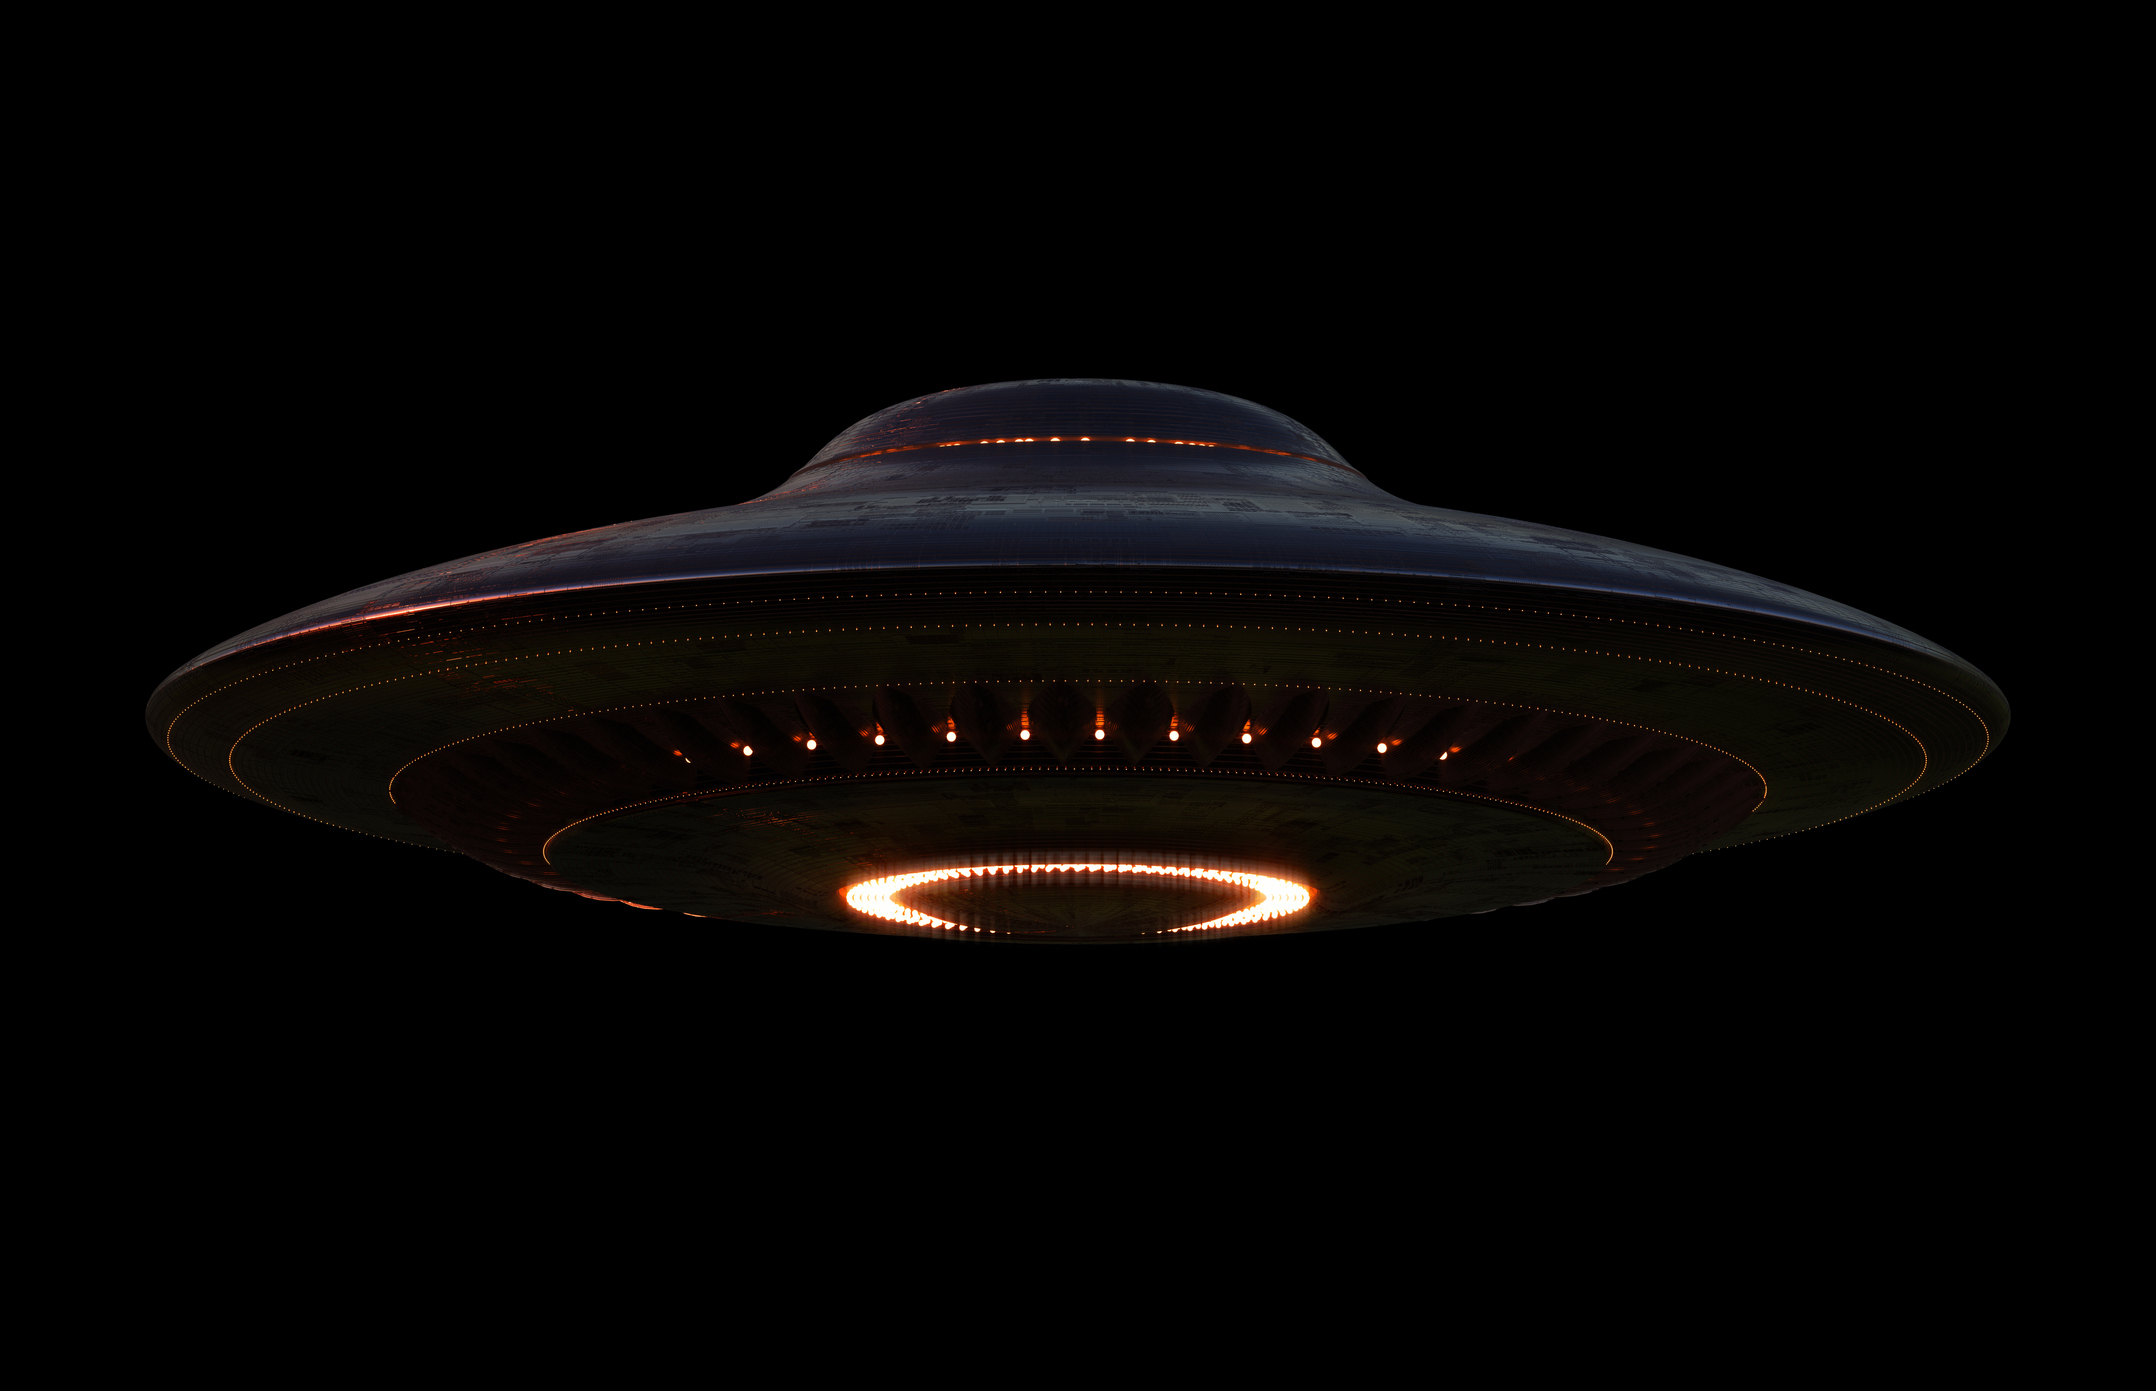 Illustration of a UFO with illuminated circular patterns on its underside against a dark background